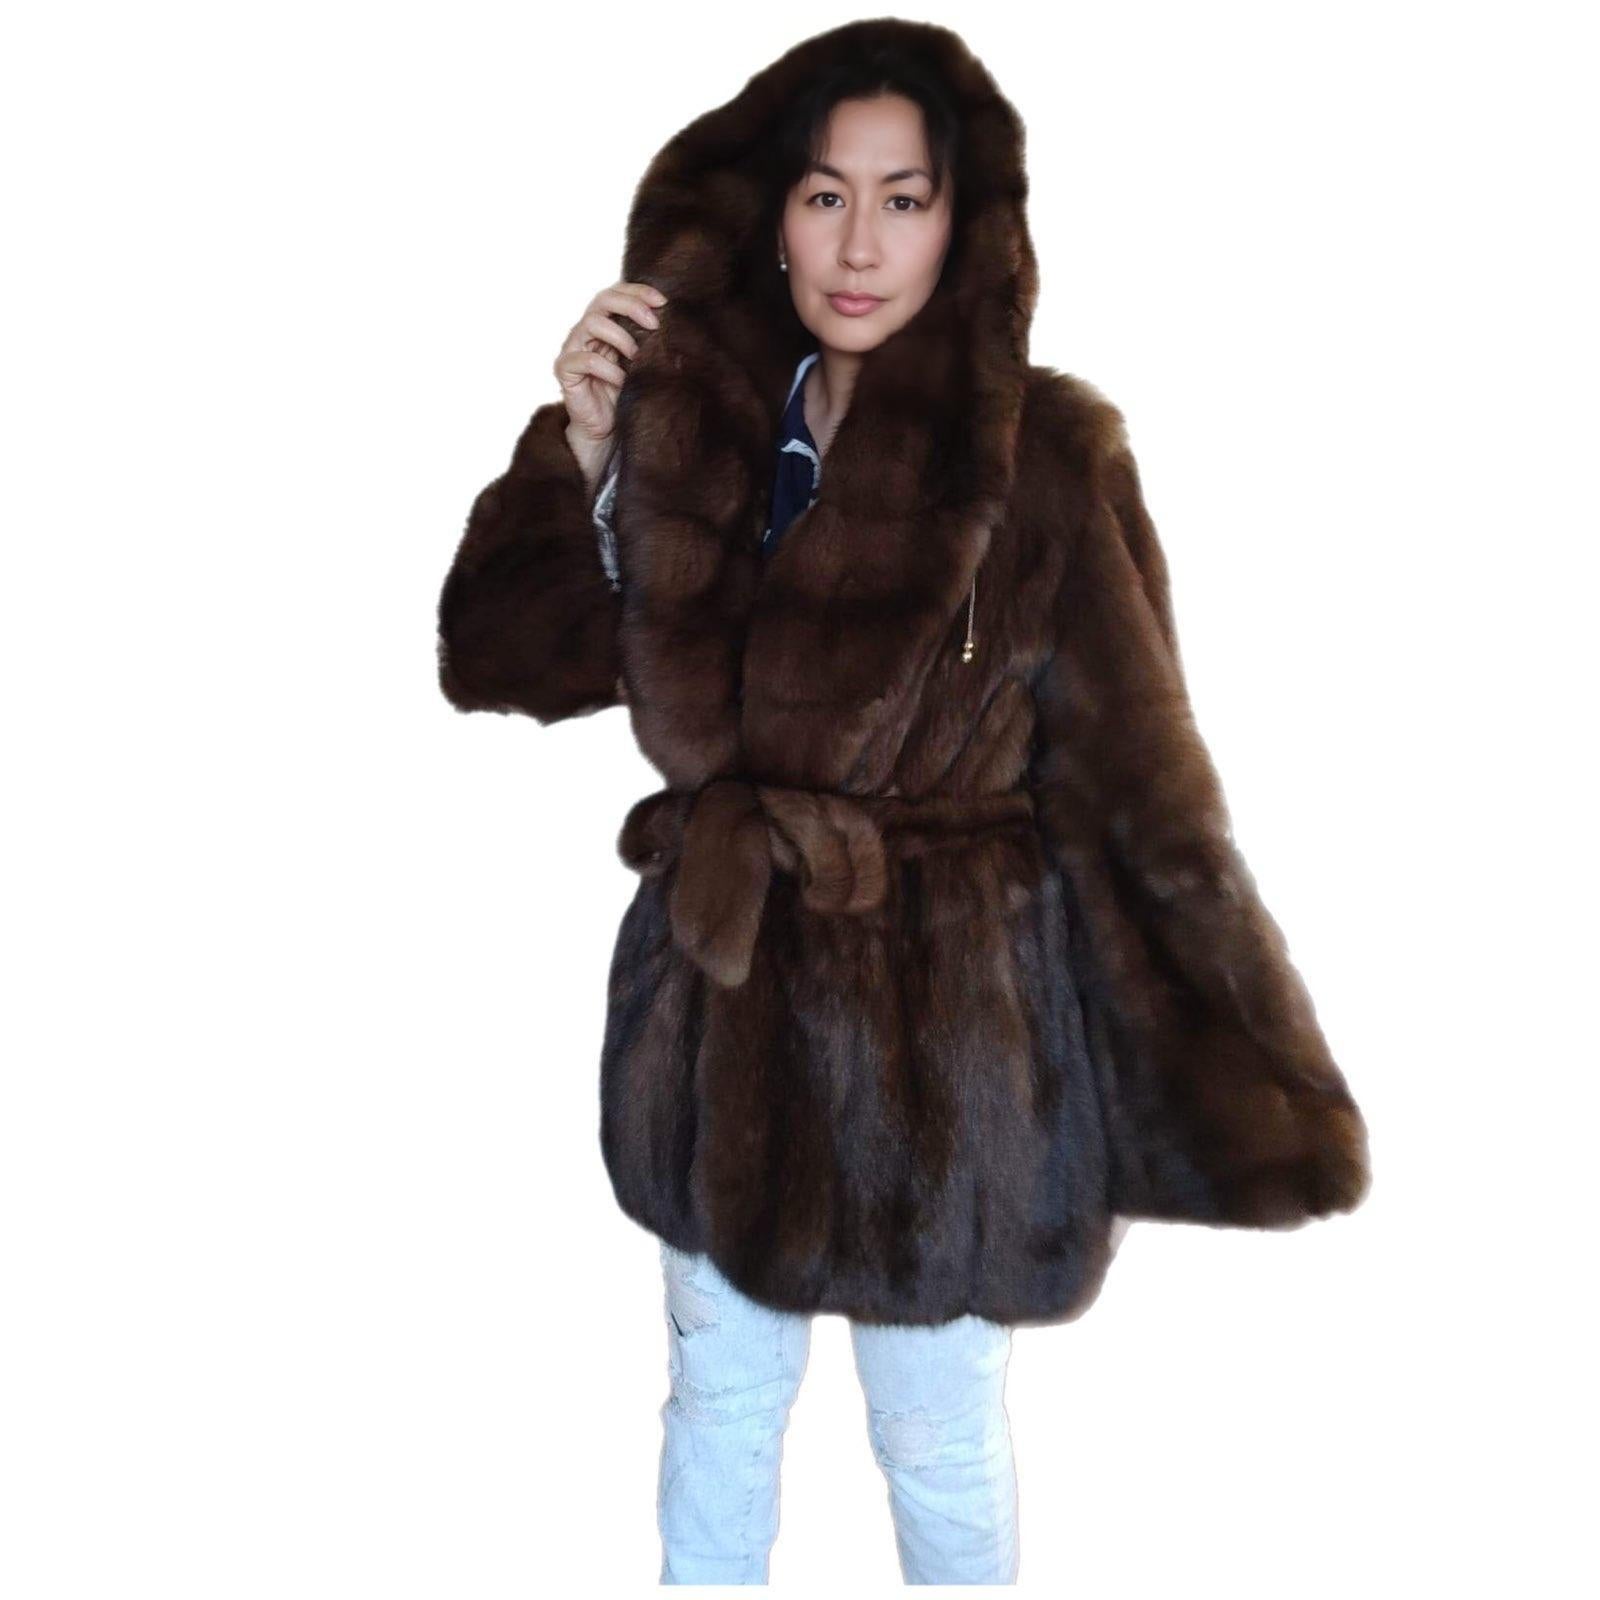 Christian Dior Russian Sable fur coat size 12 tags 55000$ For Sale 12